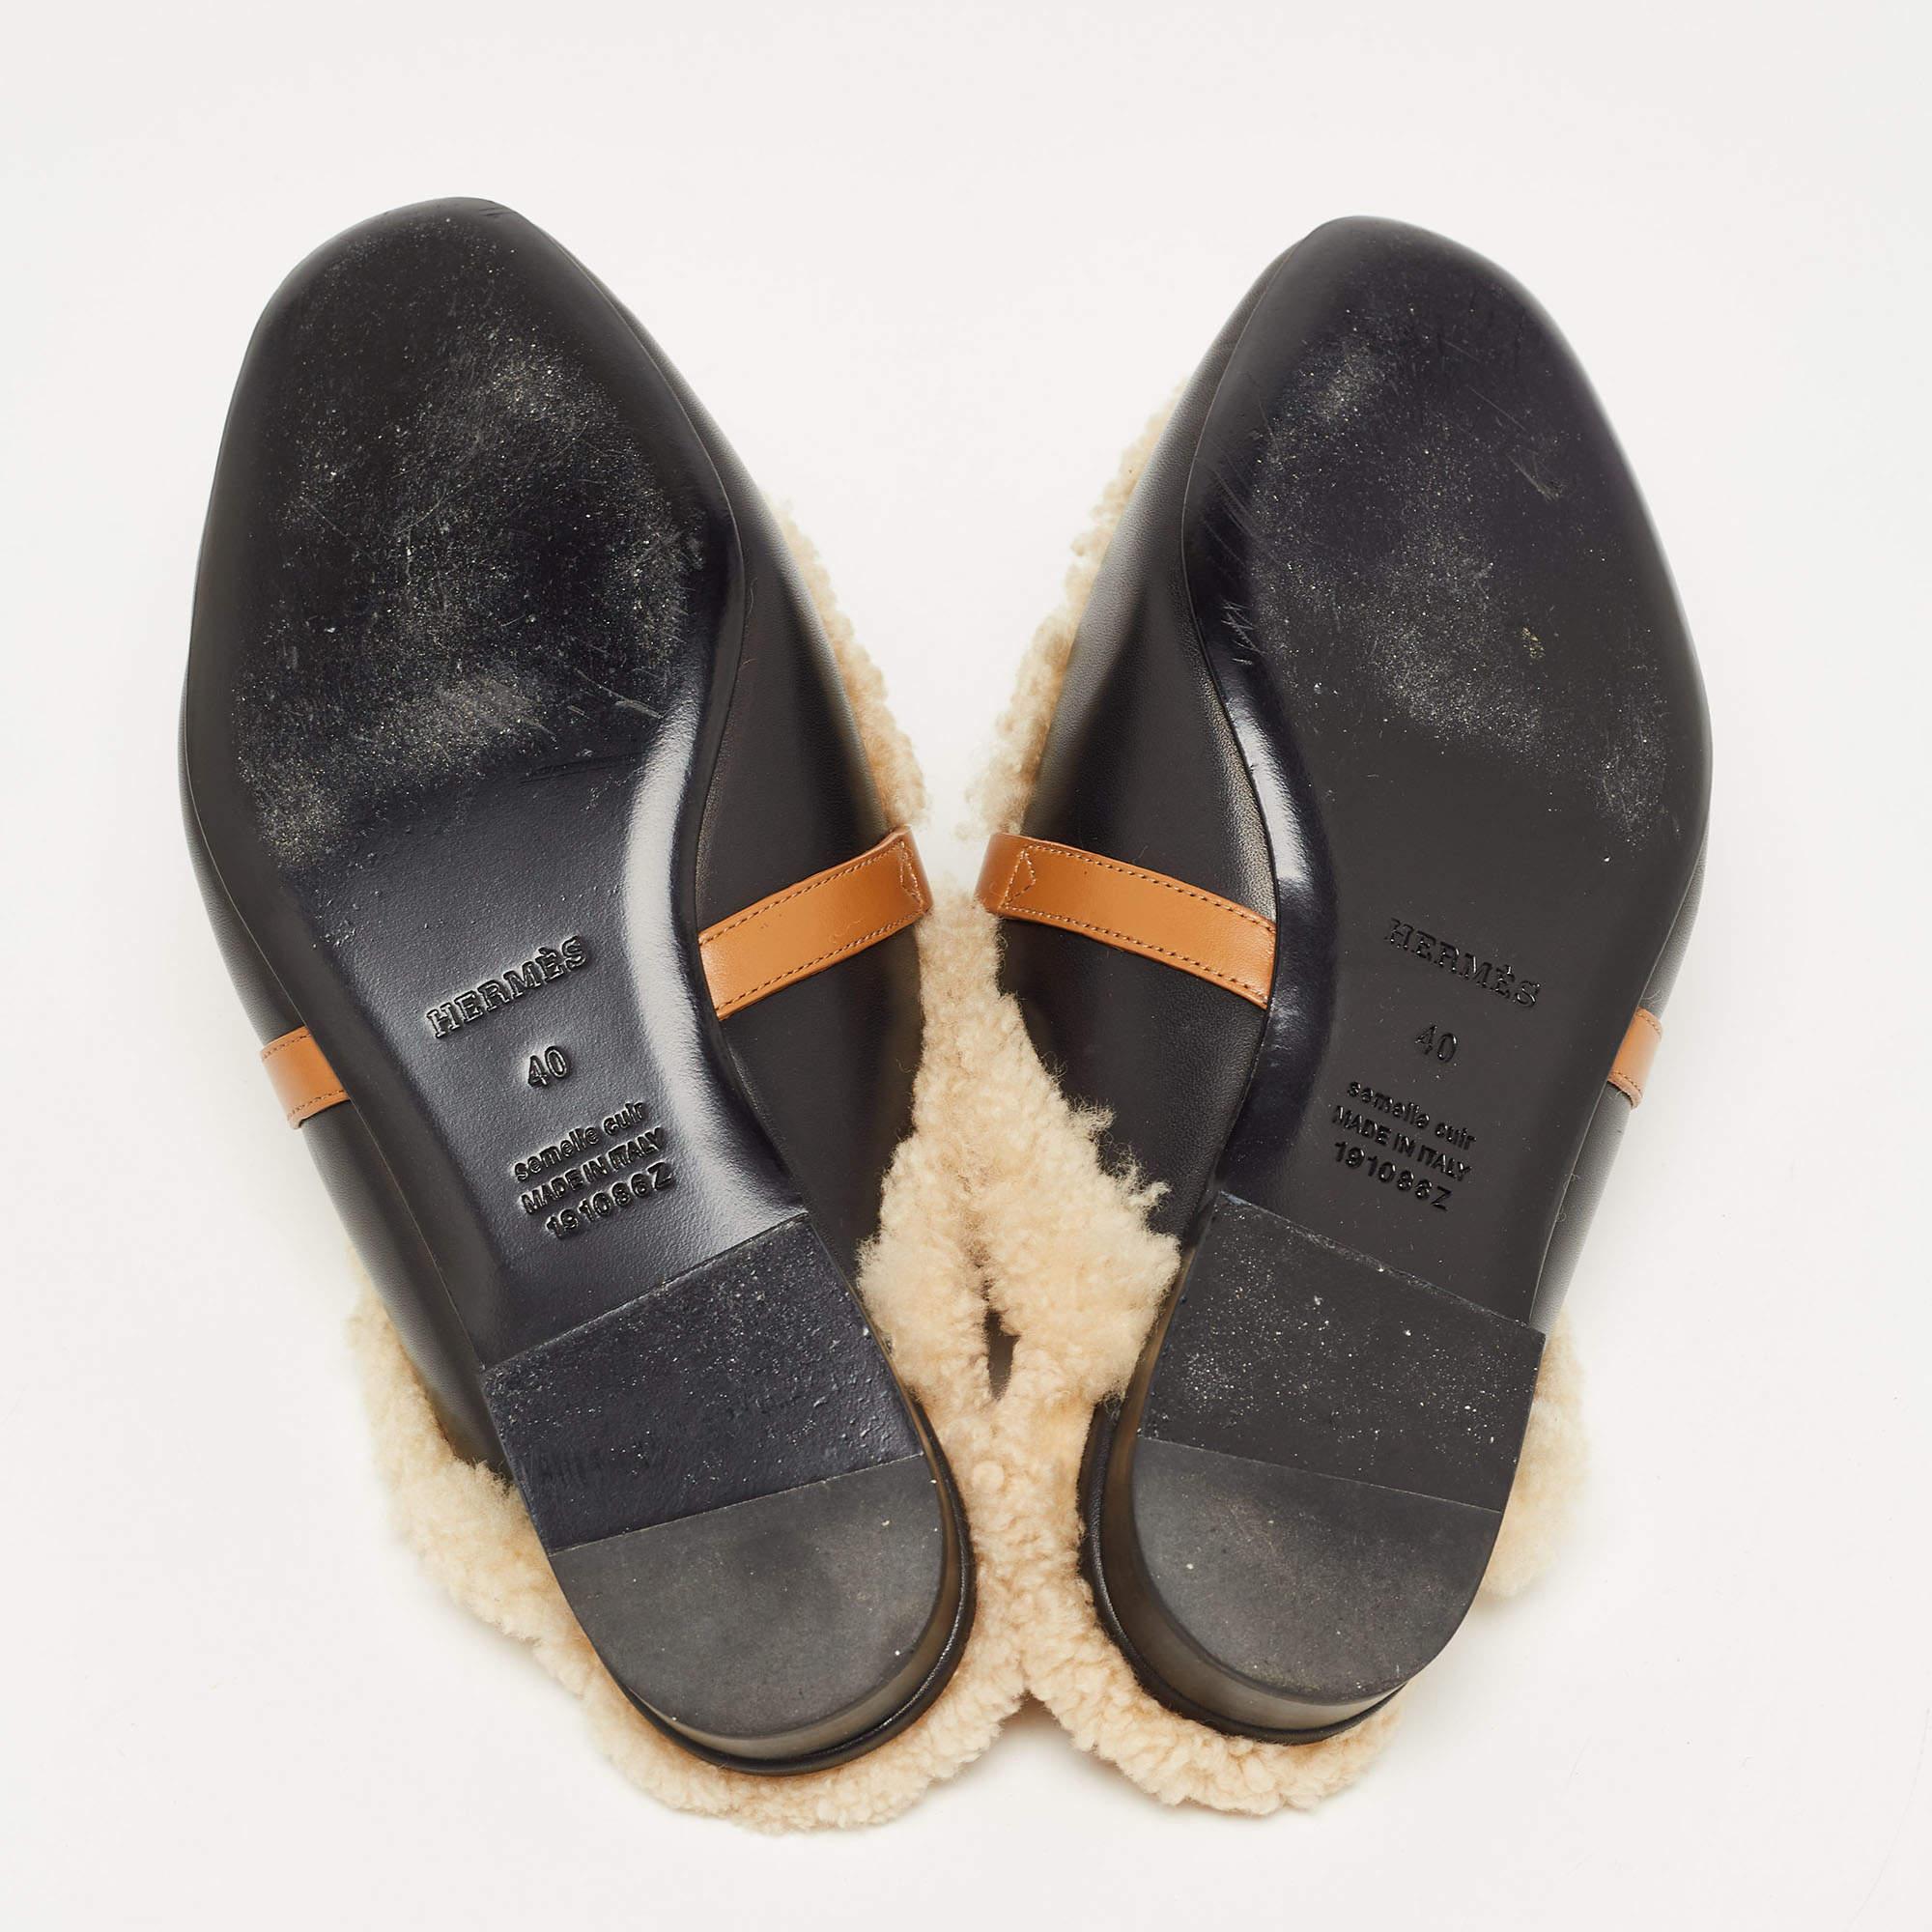 Hermes Black/Beige Leather and Shearling Fur Oz Flat Mules Size 40 3